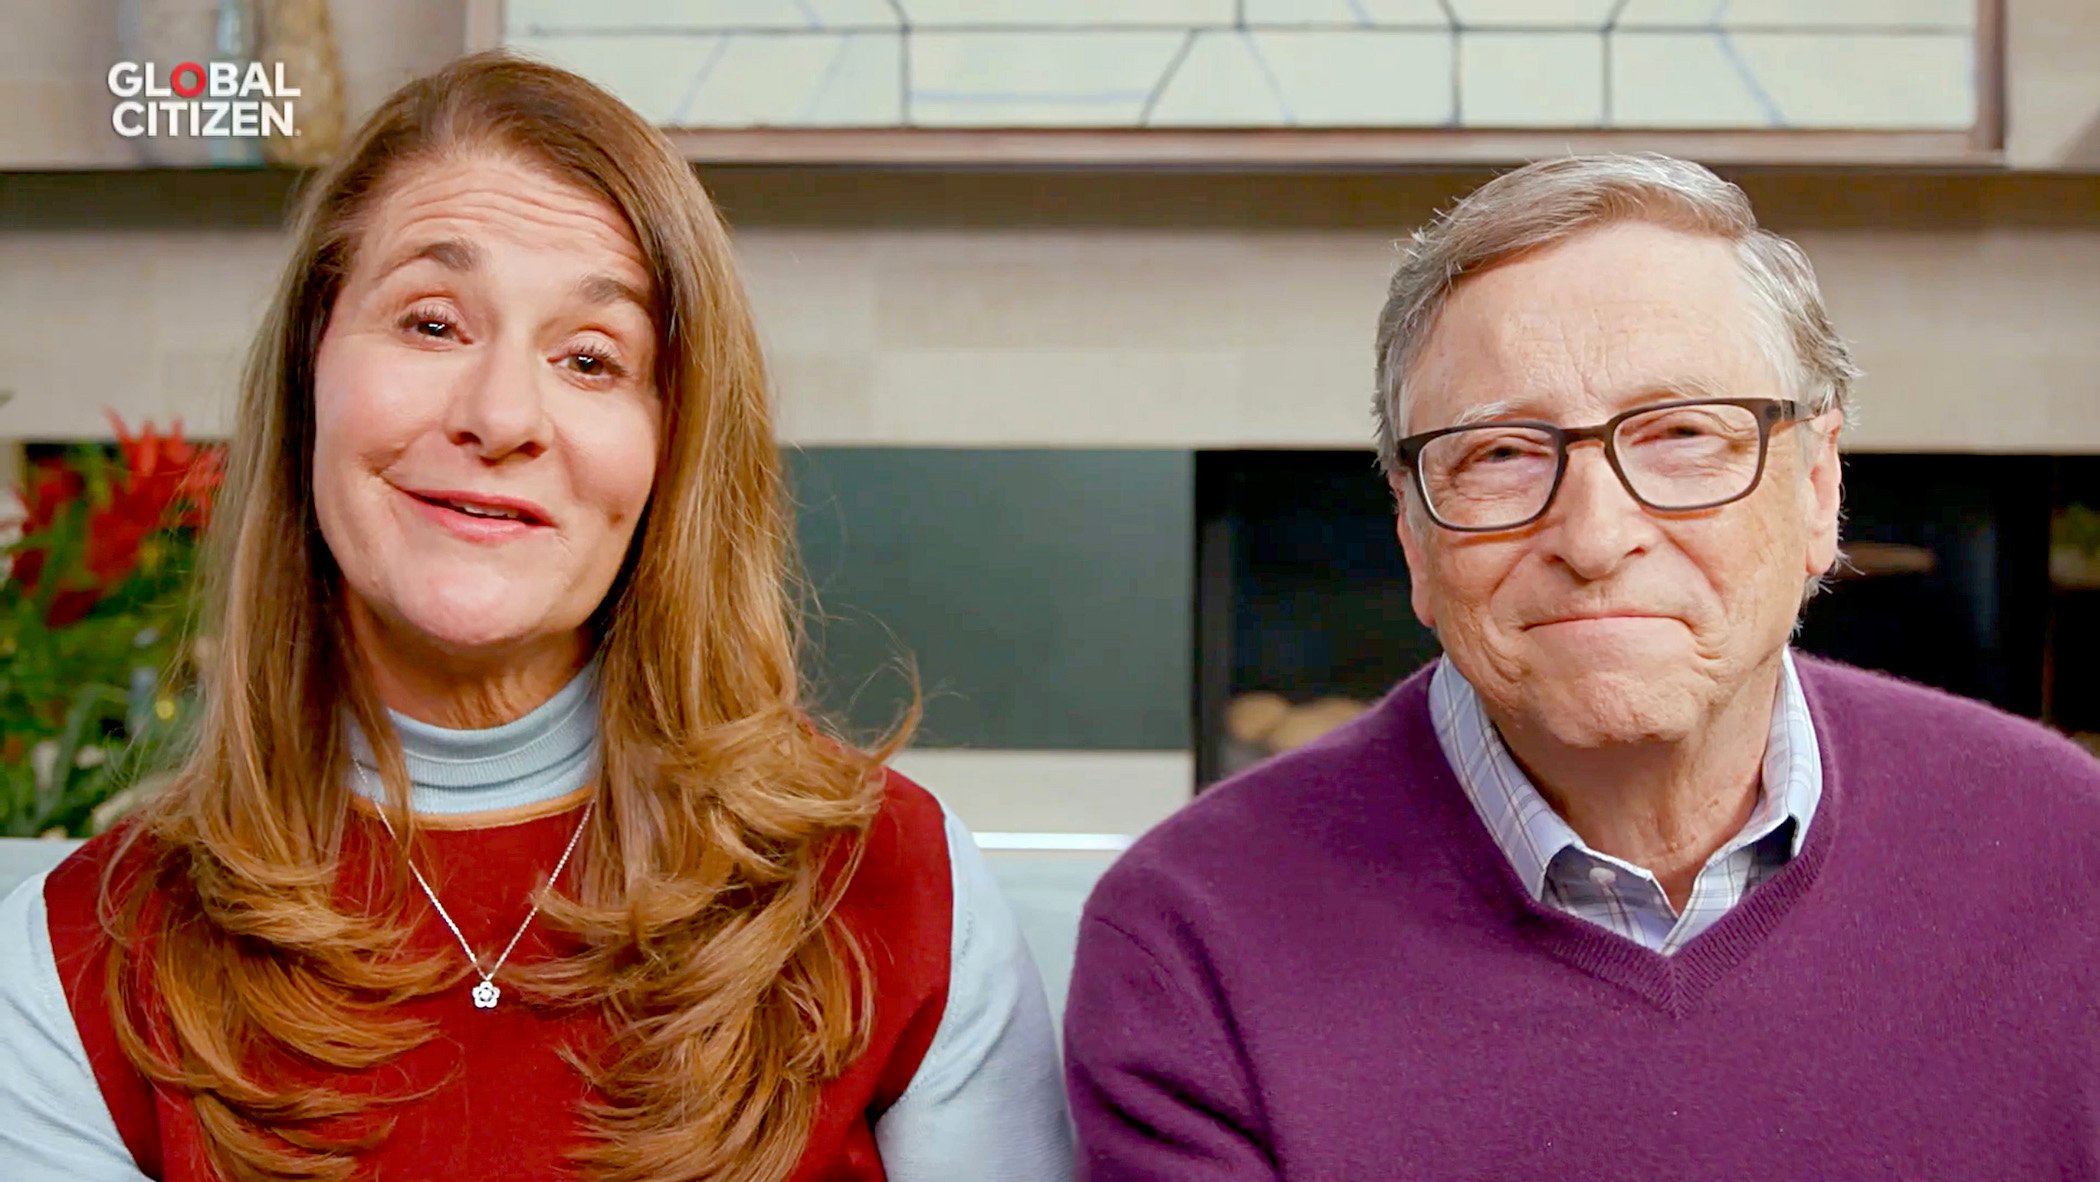 Melinda Gates and Bill Gates sitting together on a couch for an online event